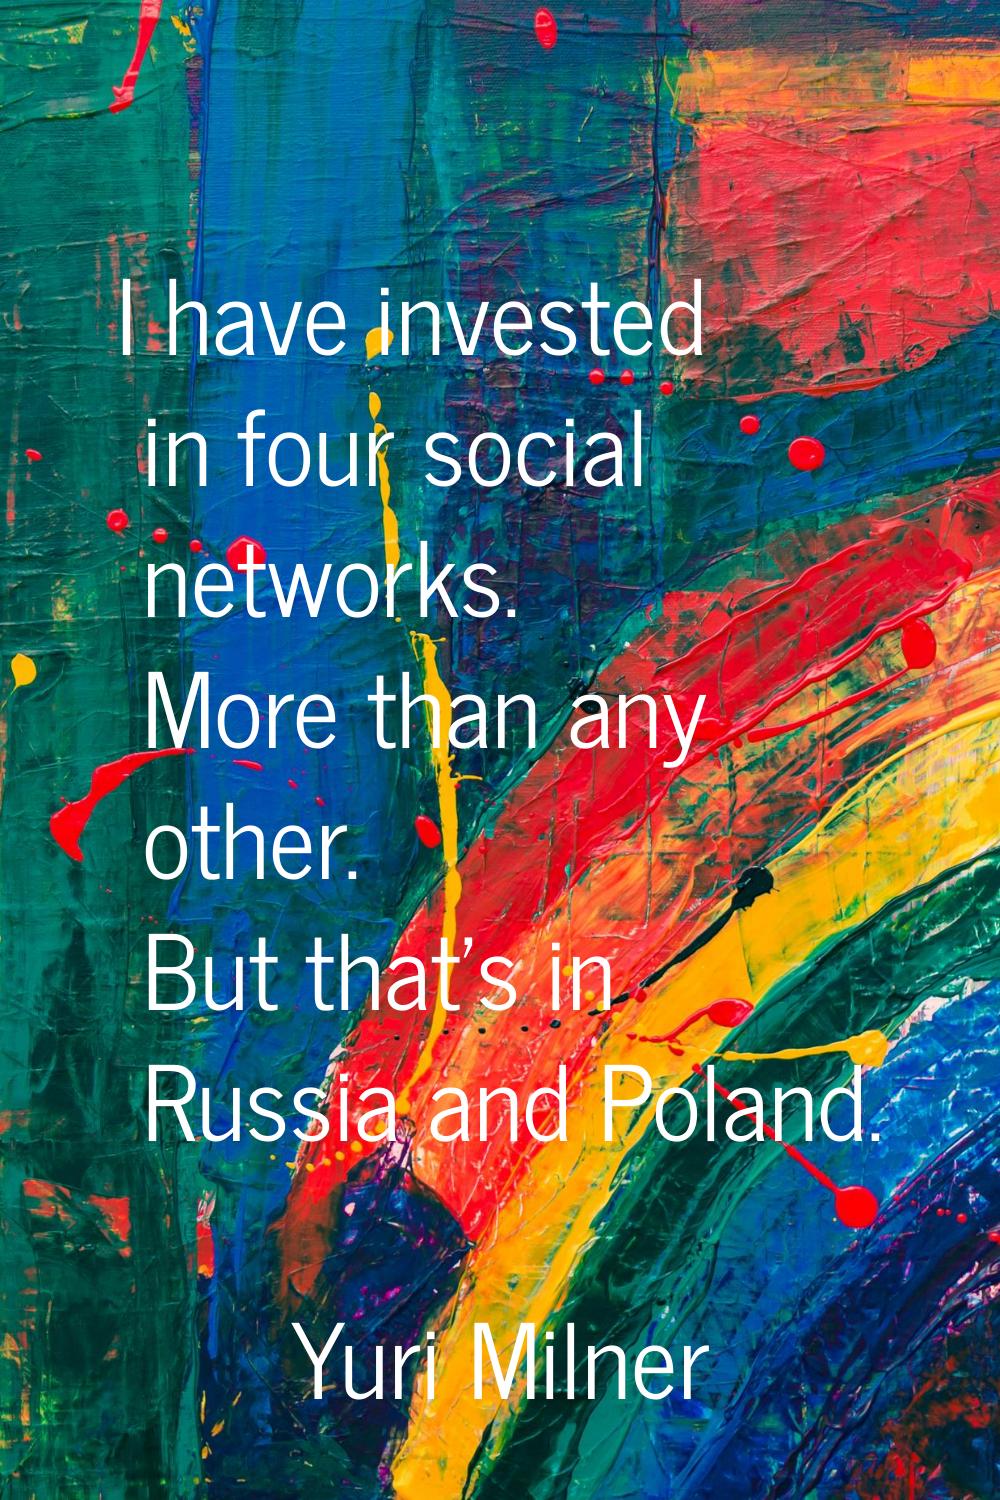 I have invested in four social networks. More than any other. But that's in Russia and Poland.